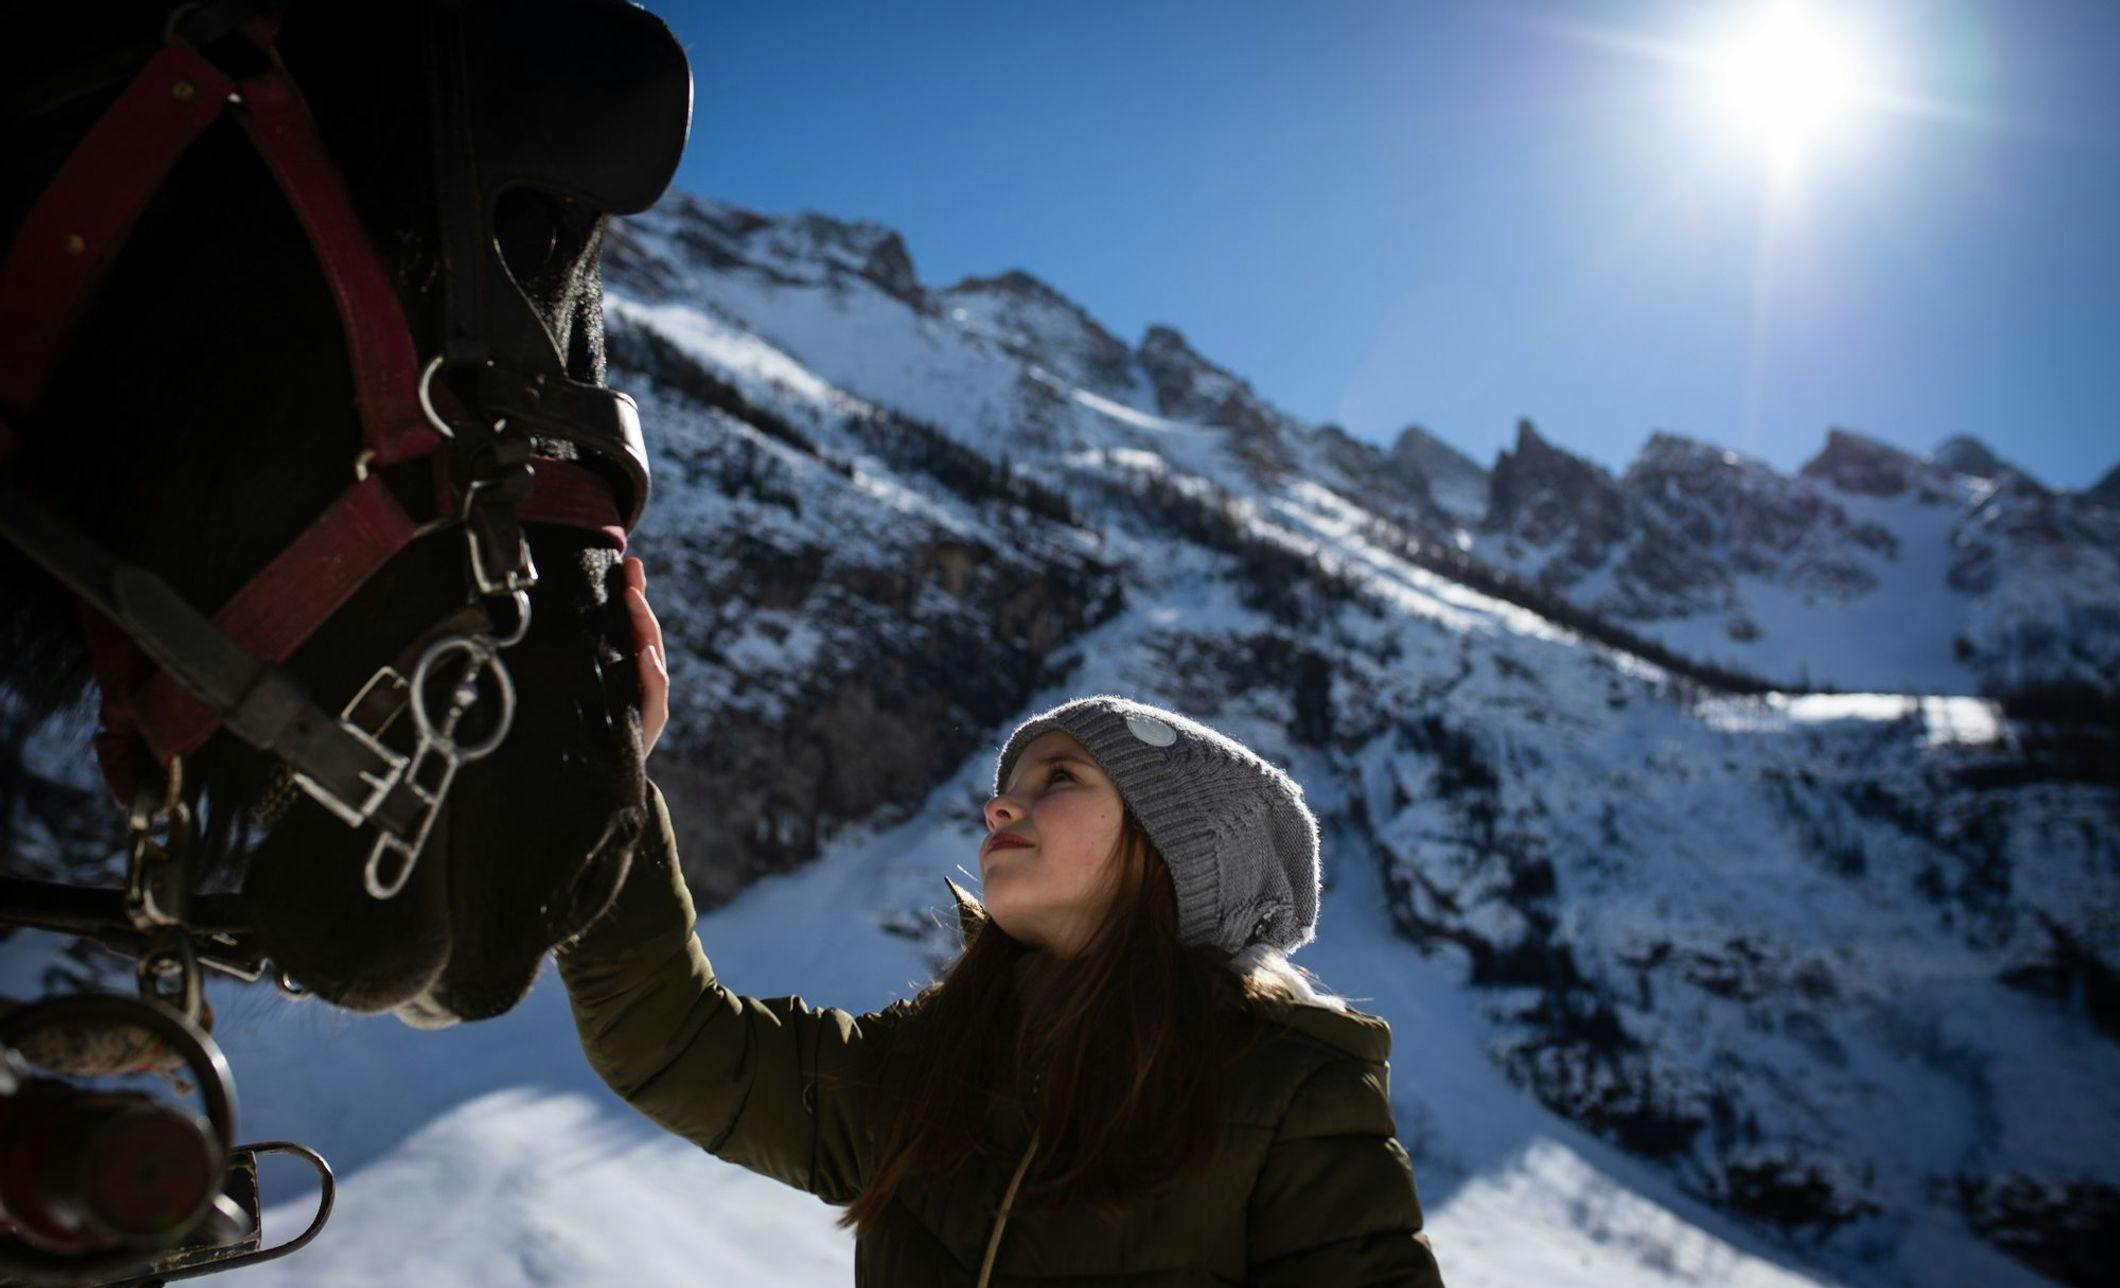 A young girl petting a horse that is going to pull her on a sleigh ride